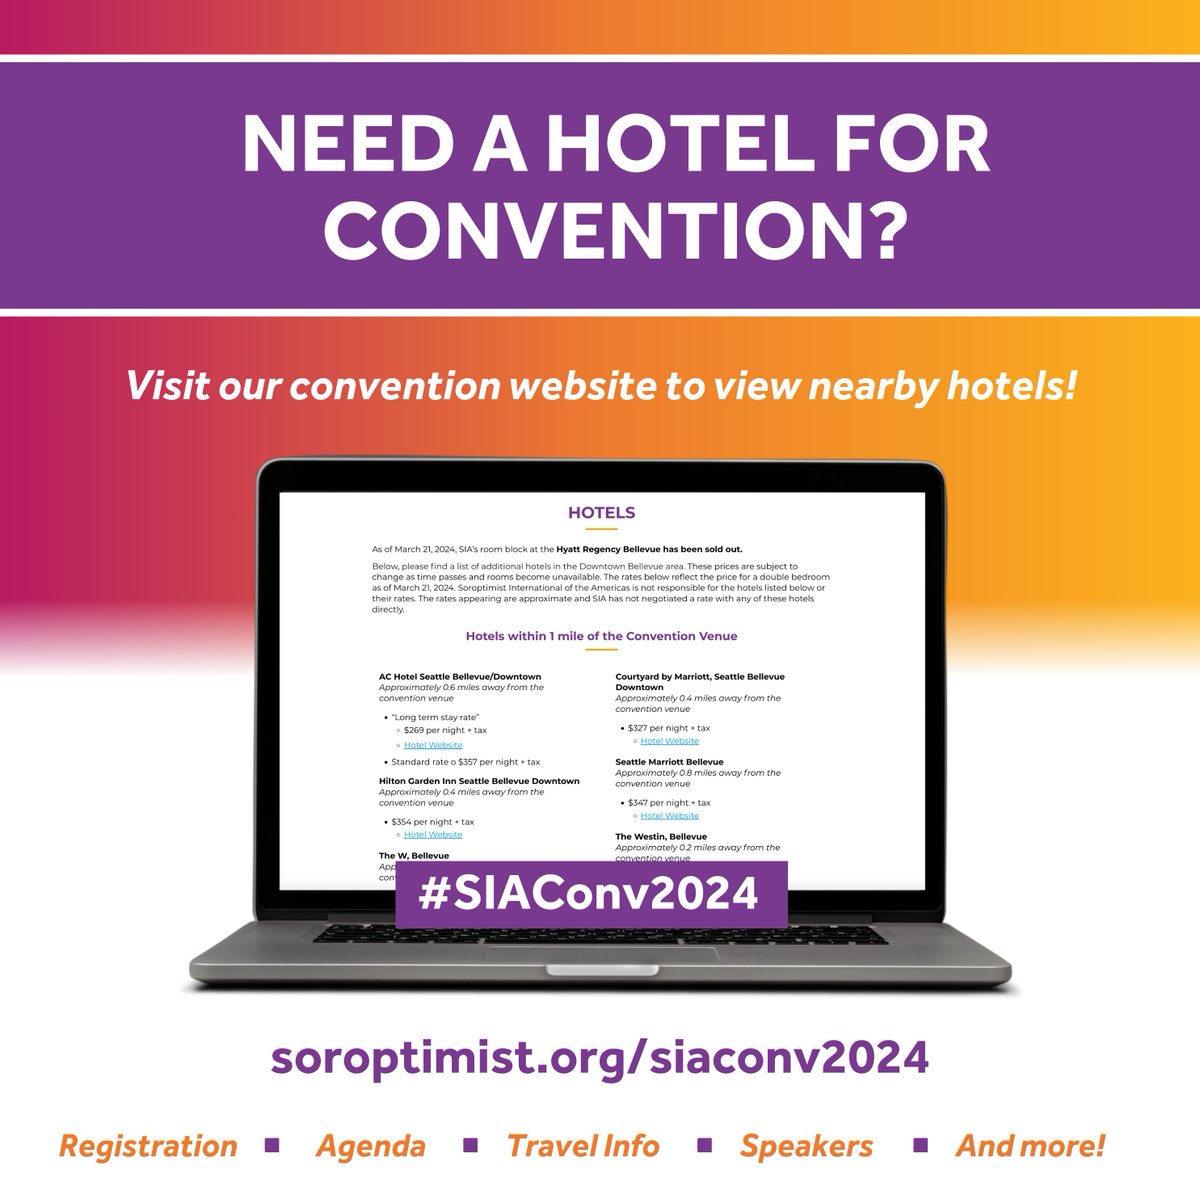 As of March 21, 2024, SIA’s room block at the Hyatt Regency Bellevue on Seattle’s Eastside is sold out. You can find a list of additional hotels in the Downtown Bellevue area on our convention website. Visit soroptimist.org/siaconv2024 #SIAConv2024